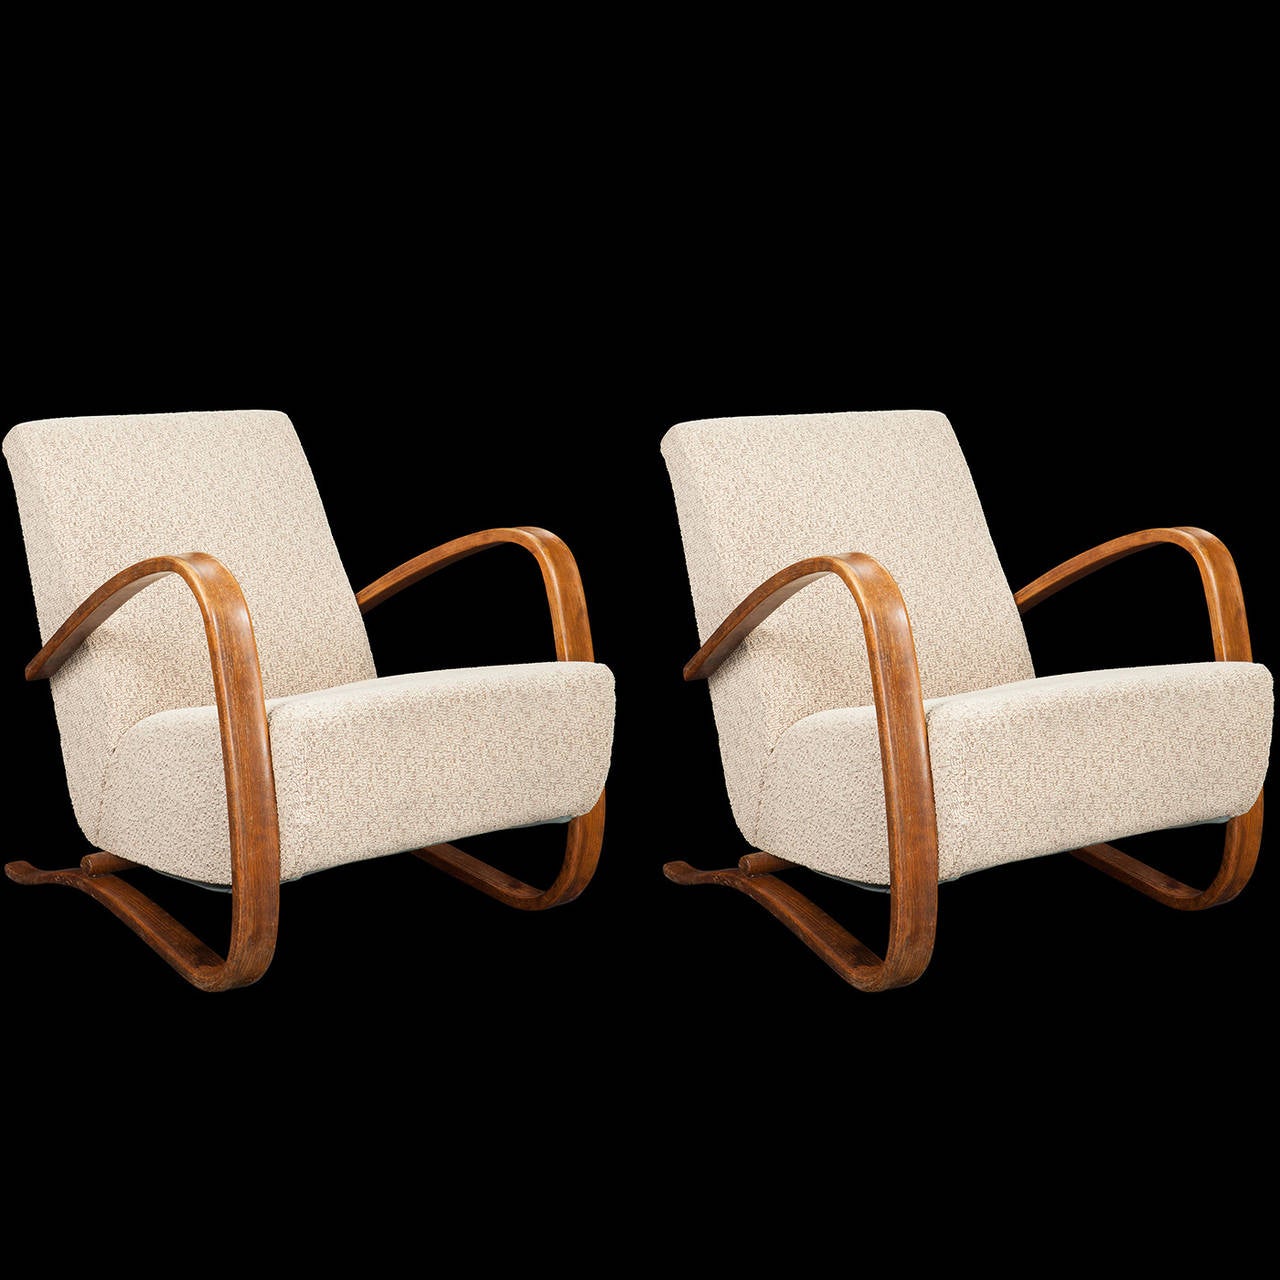 H269 lounge chair with original upholstery, on cantilevered bentwood frame. Manufactured by Spojené UP Závody.